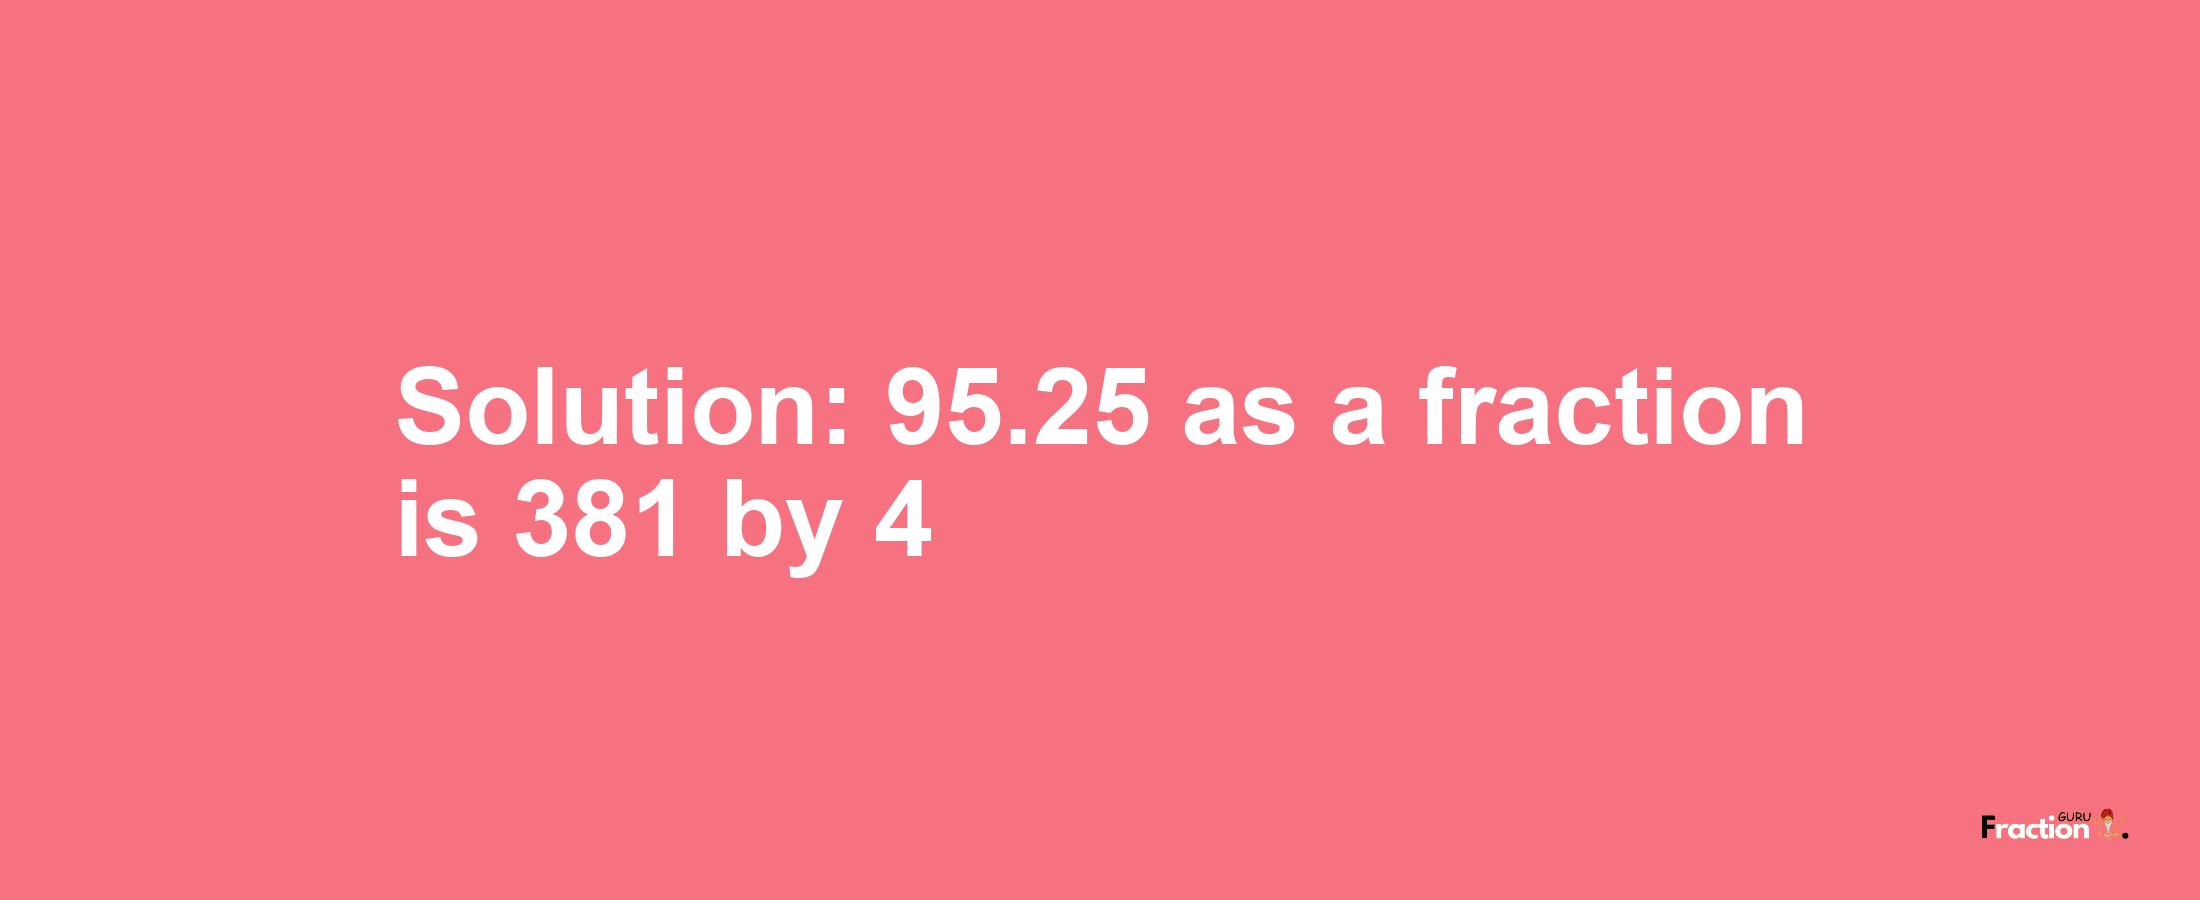 Solution:95.25 as a fraction is 381/4